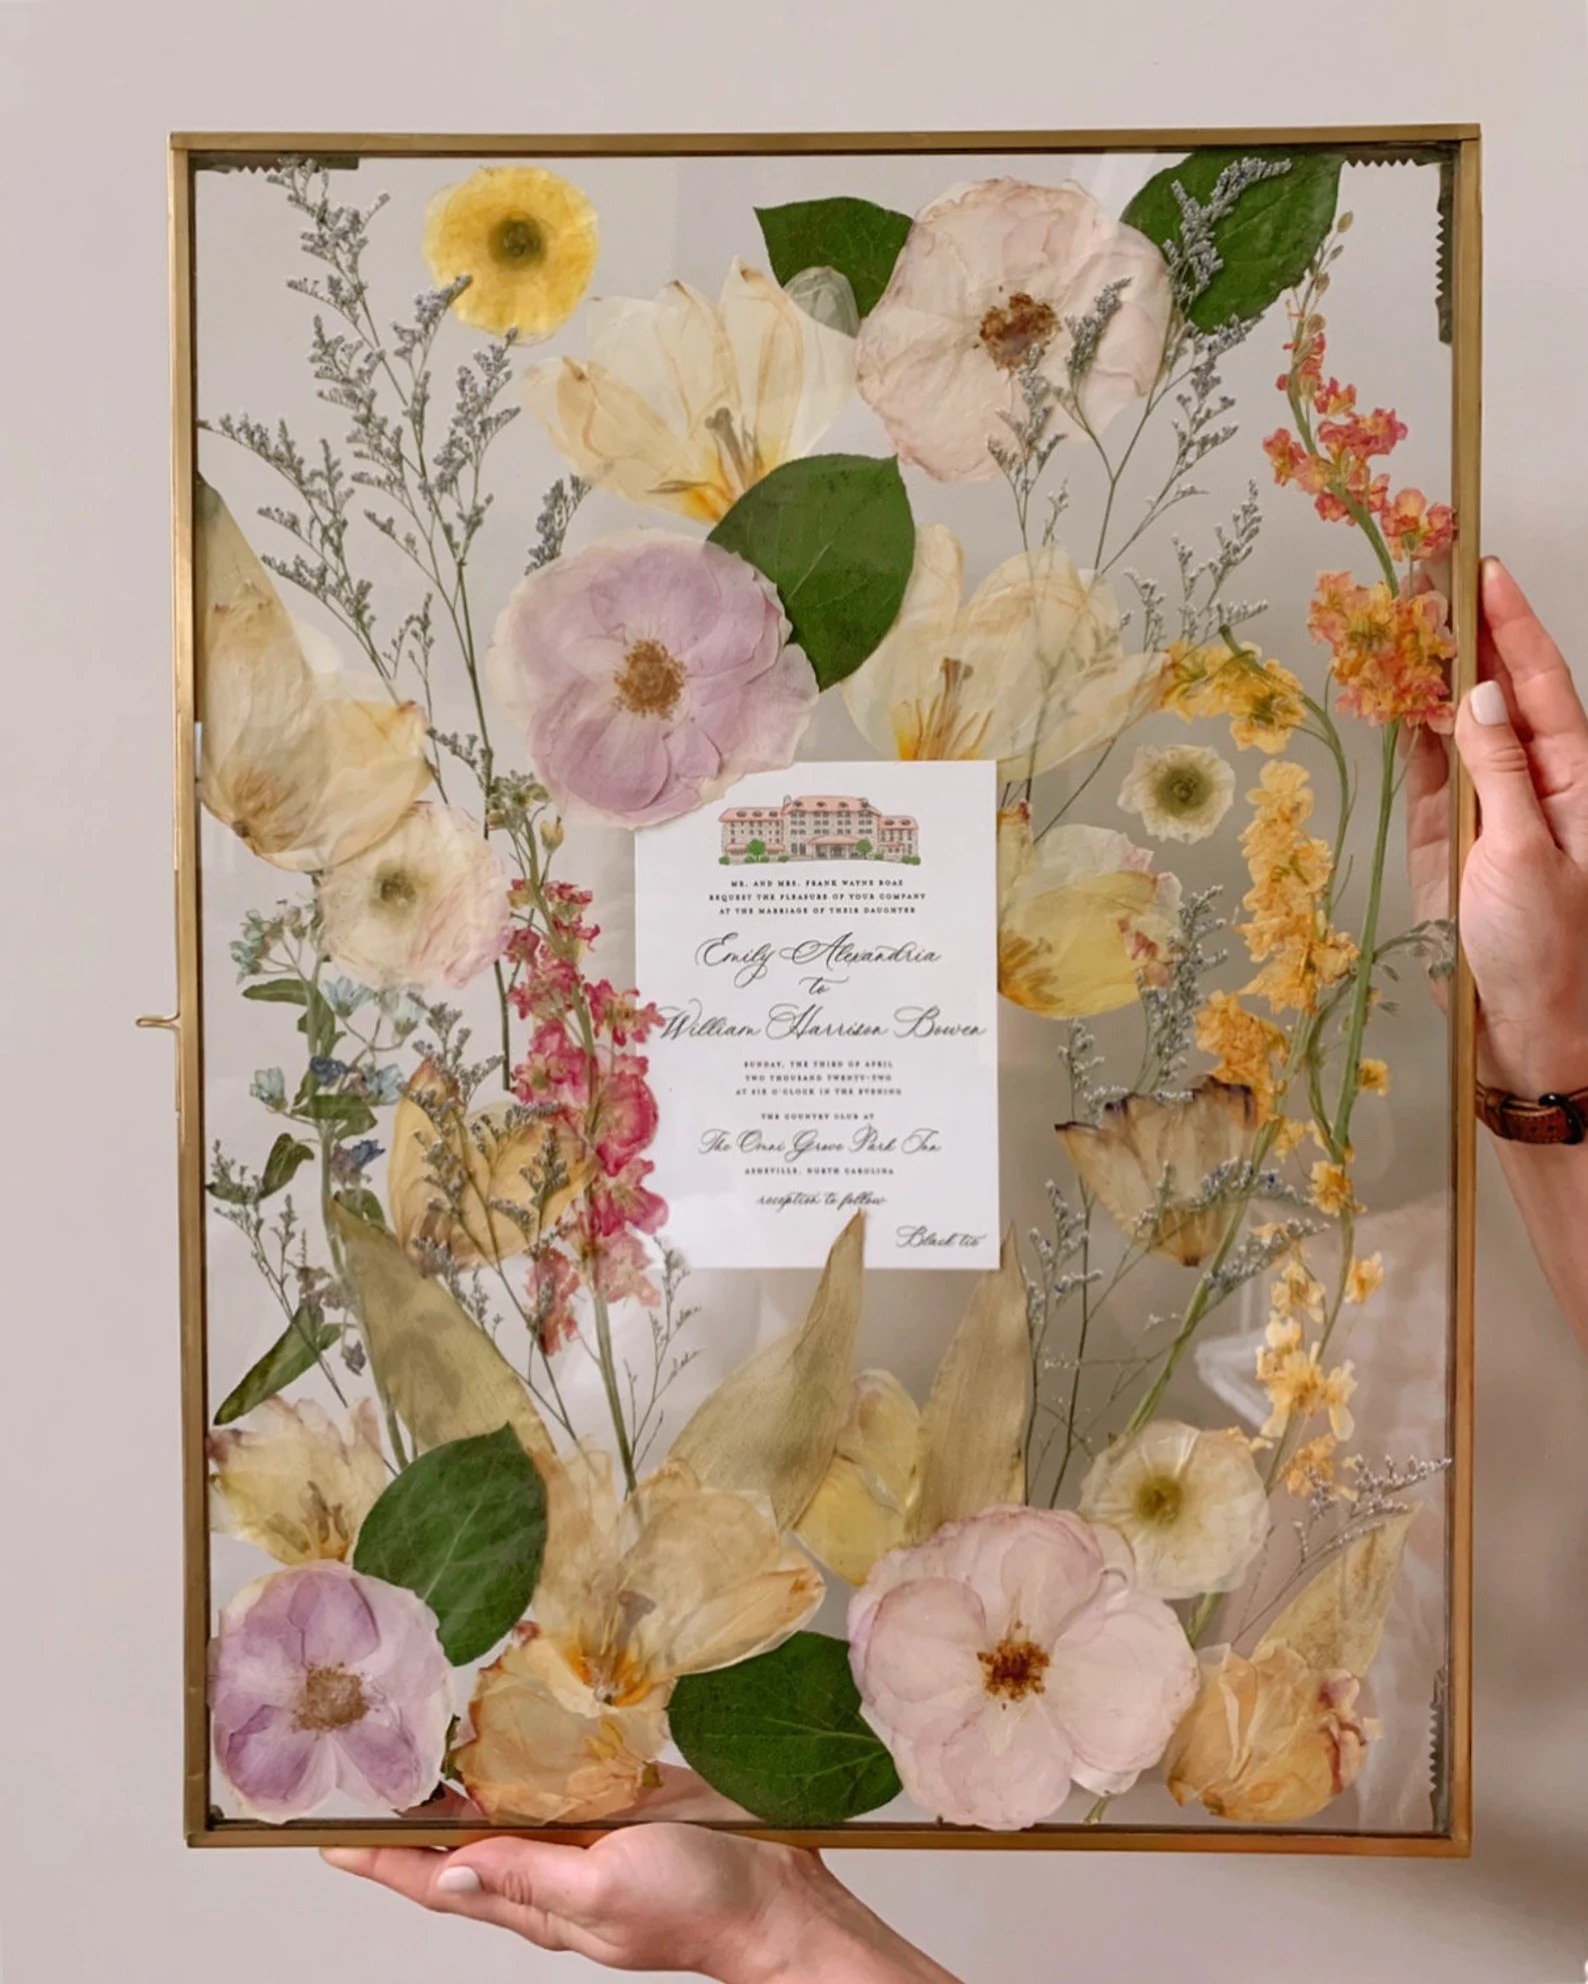 pressed flowers in the frame with wedding invitation